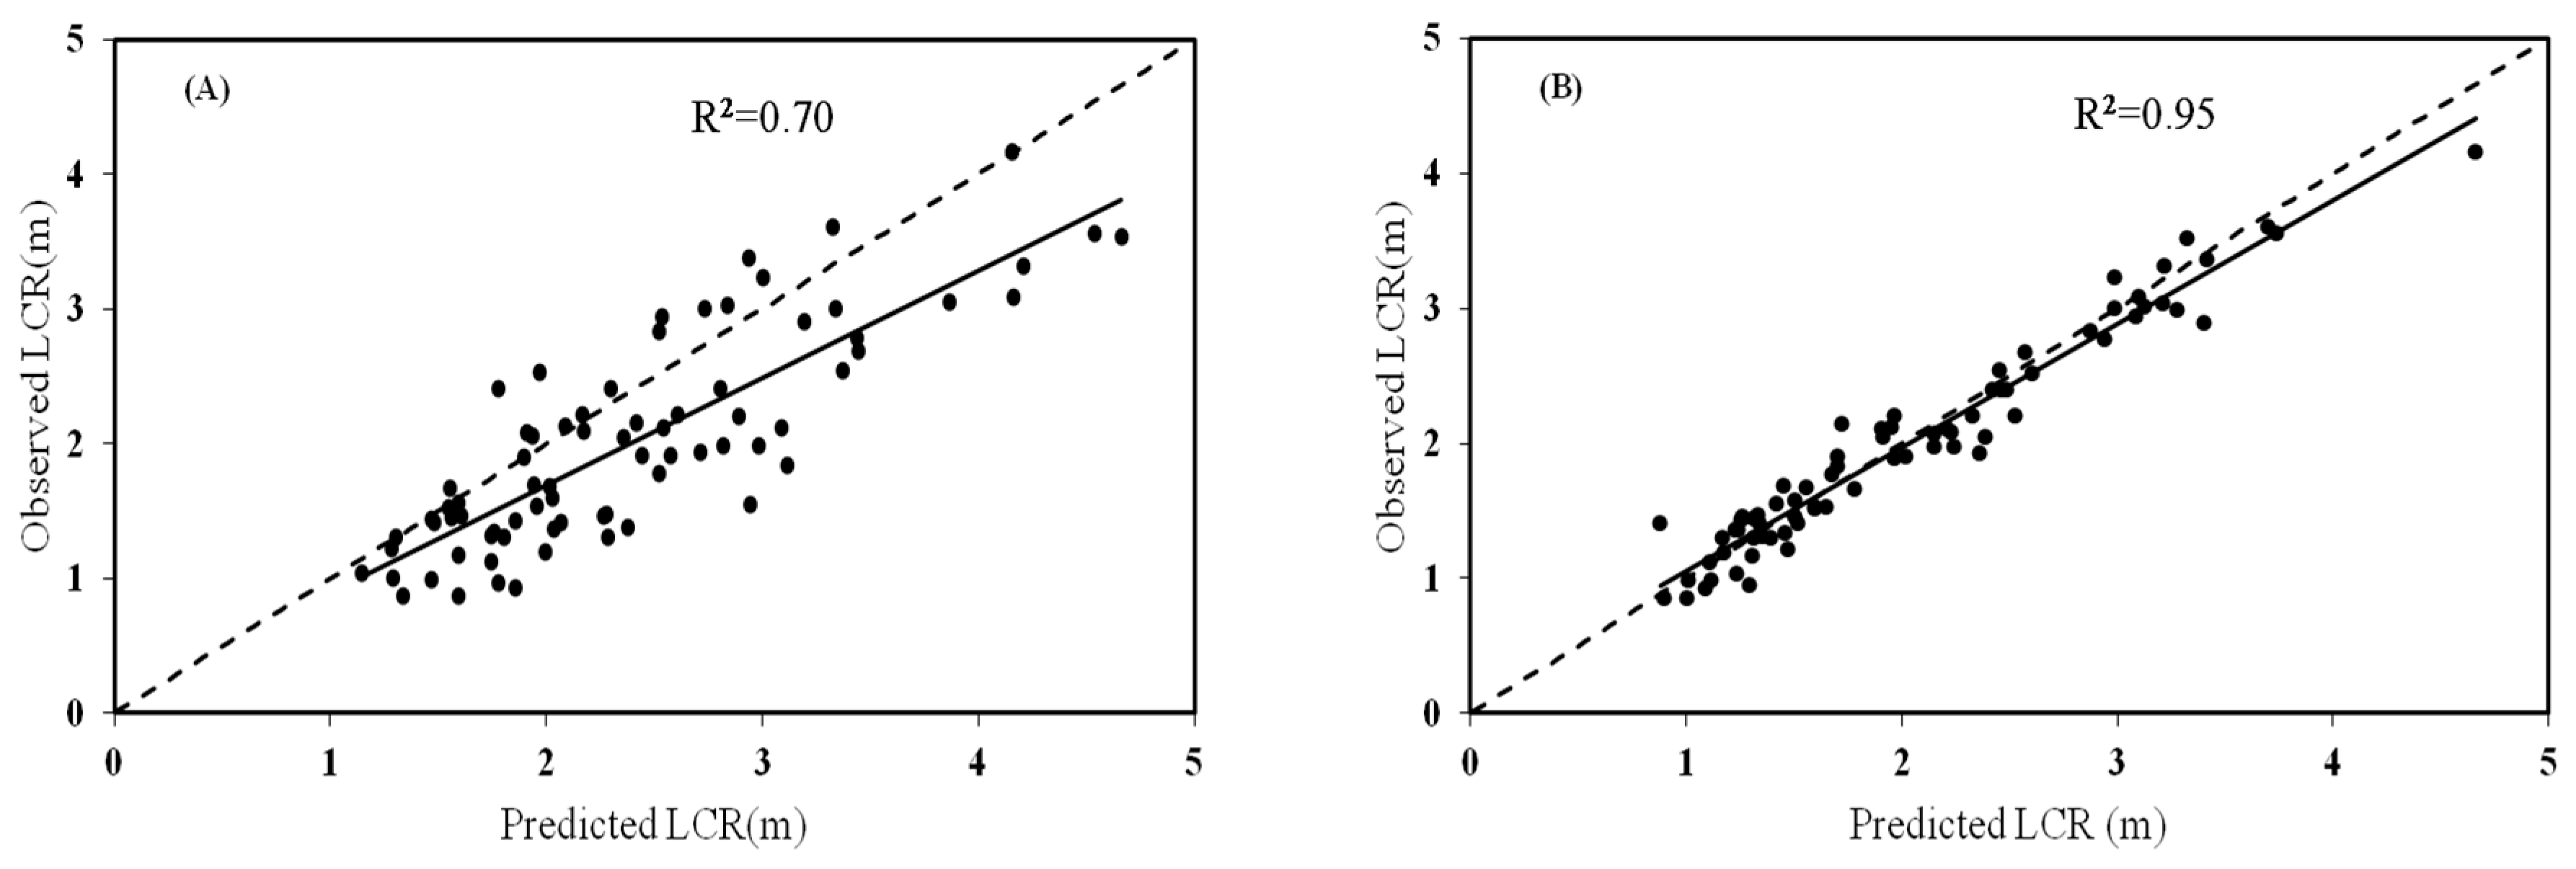 Forests | Free Full-Text | Using Linear Mixed-Effects Models with Quantile  Regression to Simulate the Crown Profile of Planted Pinus sylvestris var.  Mongolica Trees